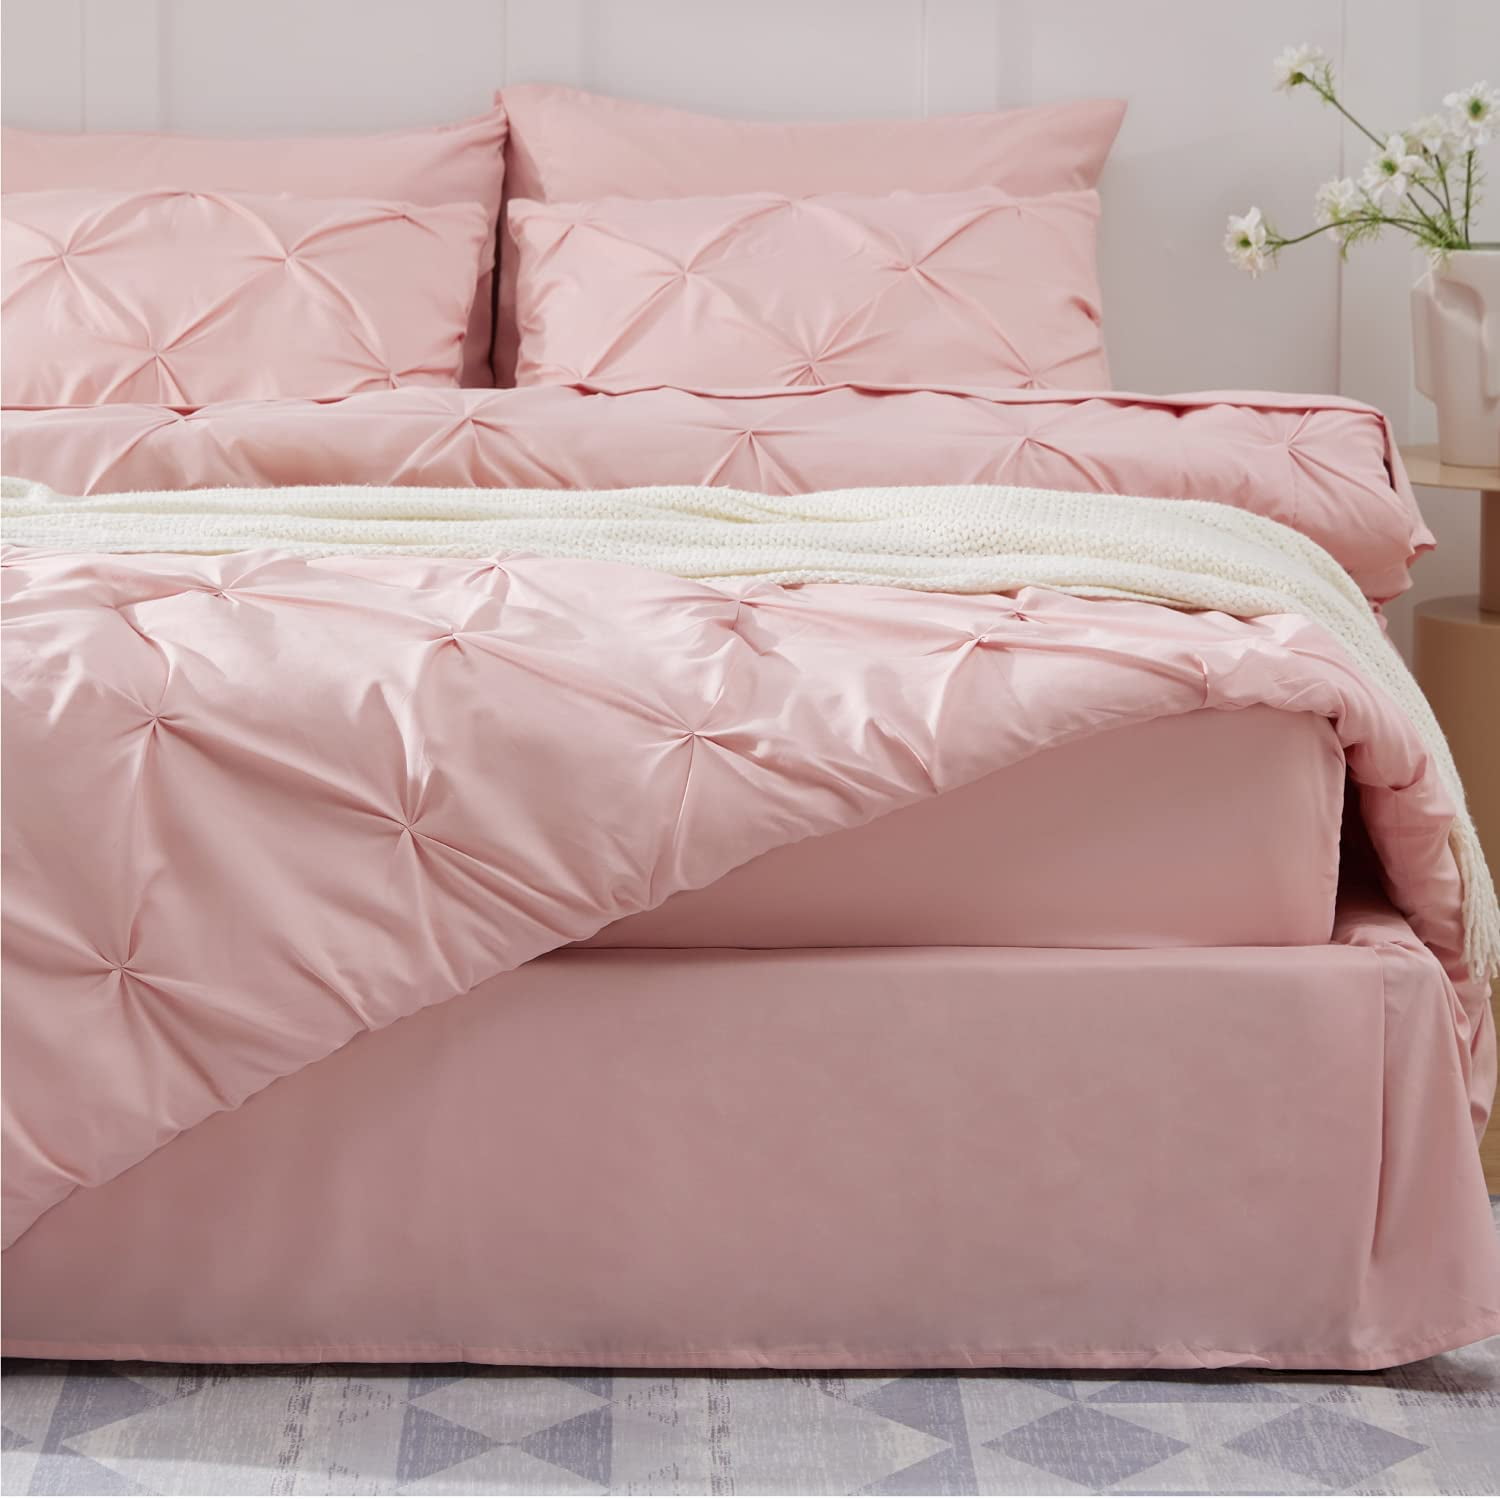 Bedsure Bed in A Bag Full Size 7 Pieces, Dusty Pink White Striped Bedding Comforter Sets All Season Bed Set, 2 Pillow Shams, Fla